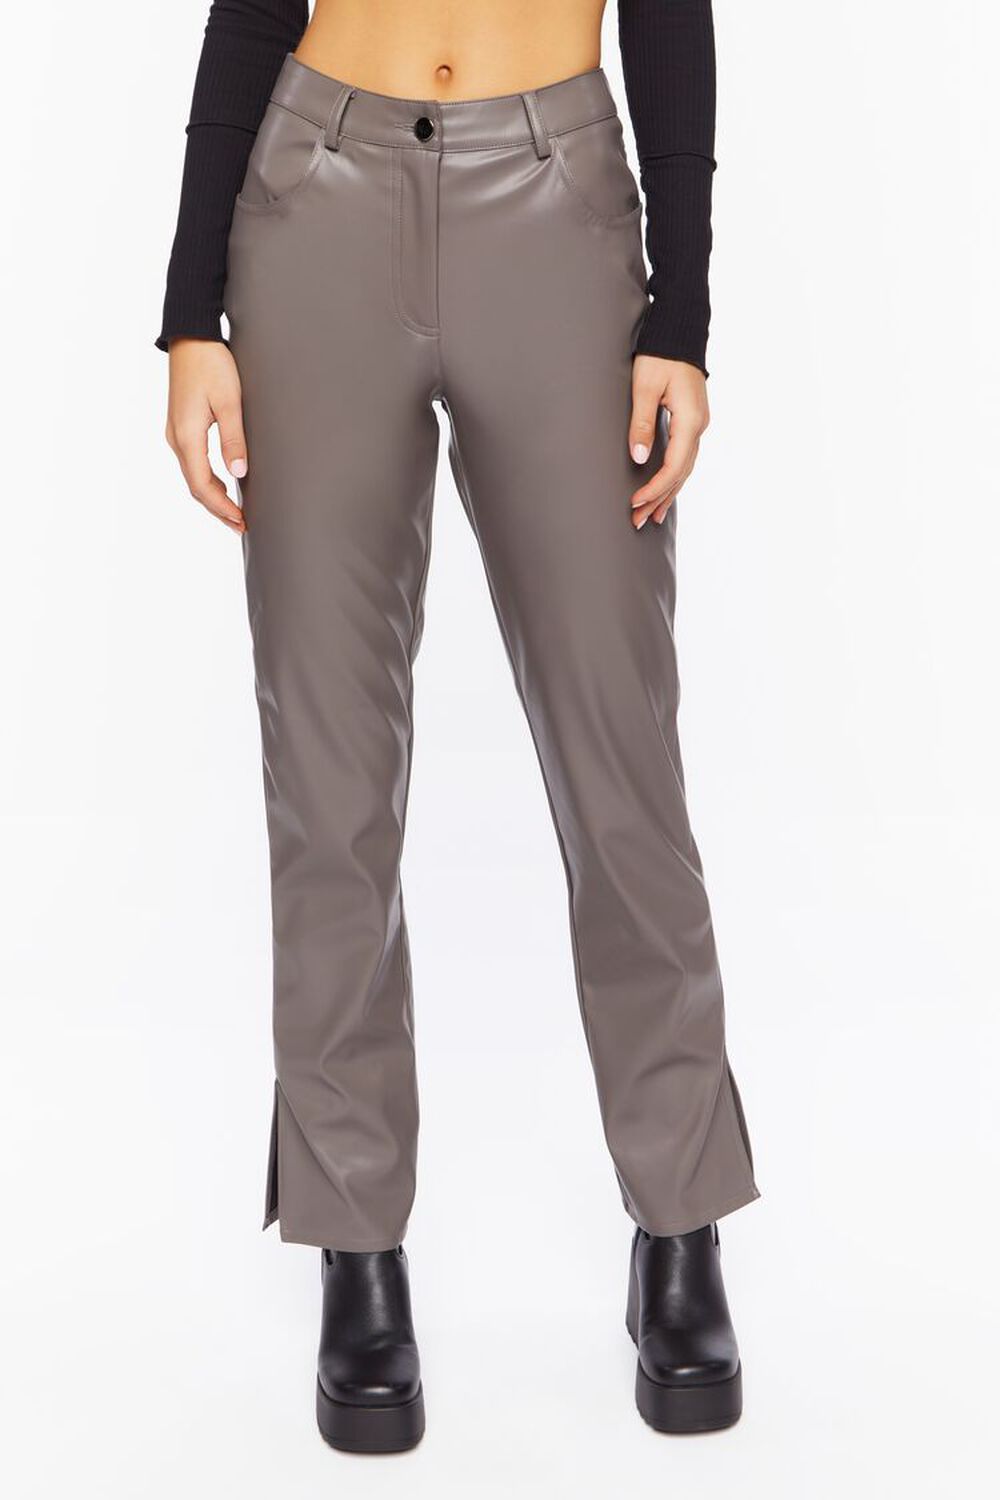 NEUTRAL GREY Faux Leather Straight-Leg Pants, image 2